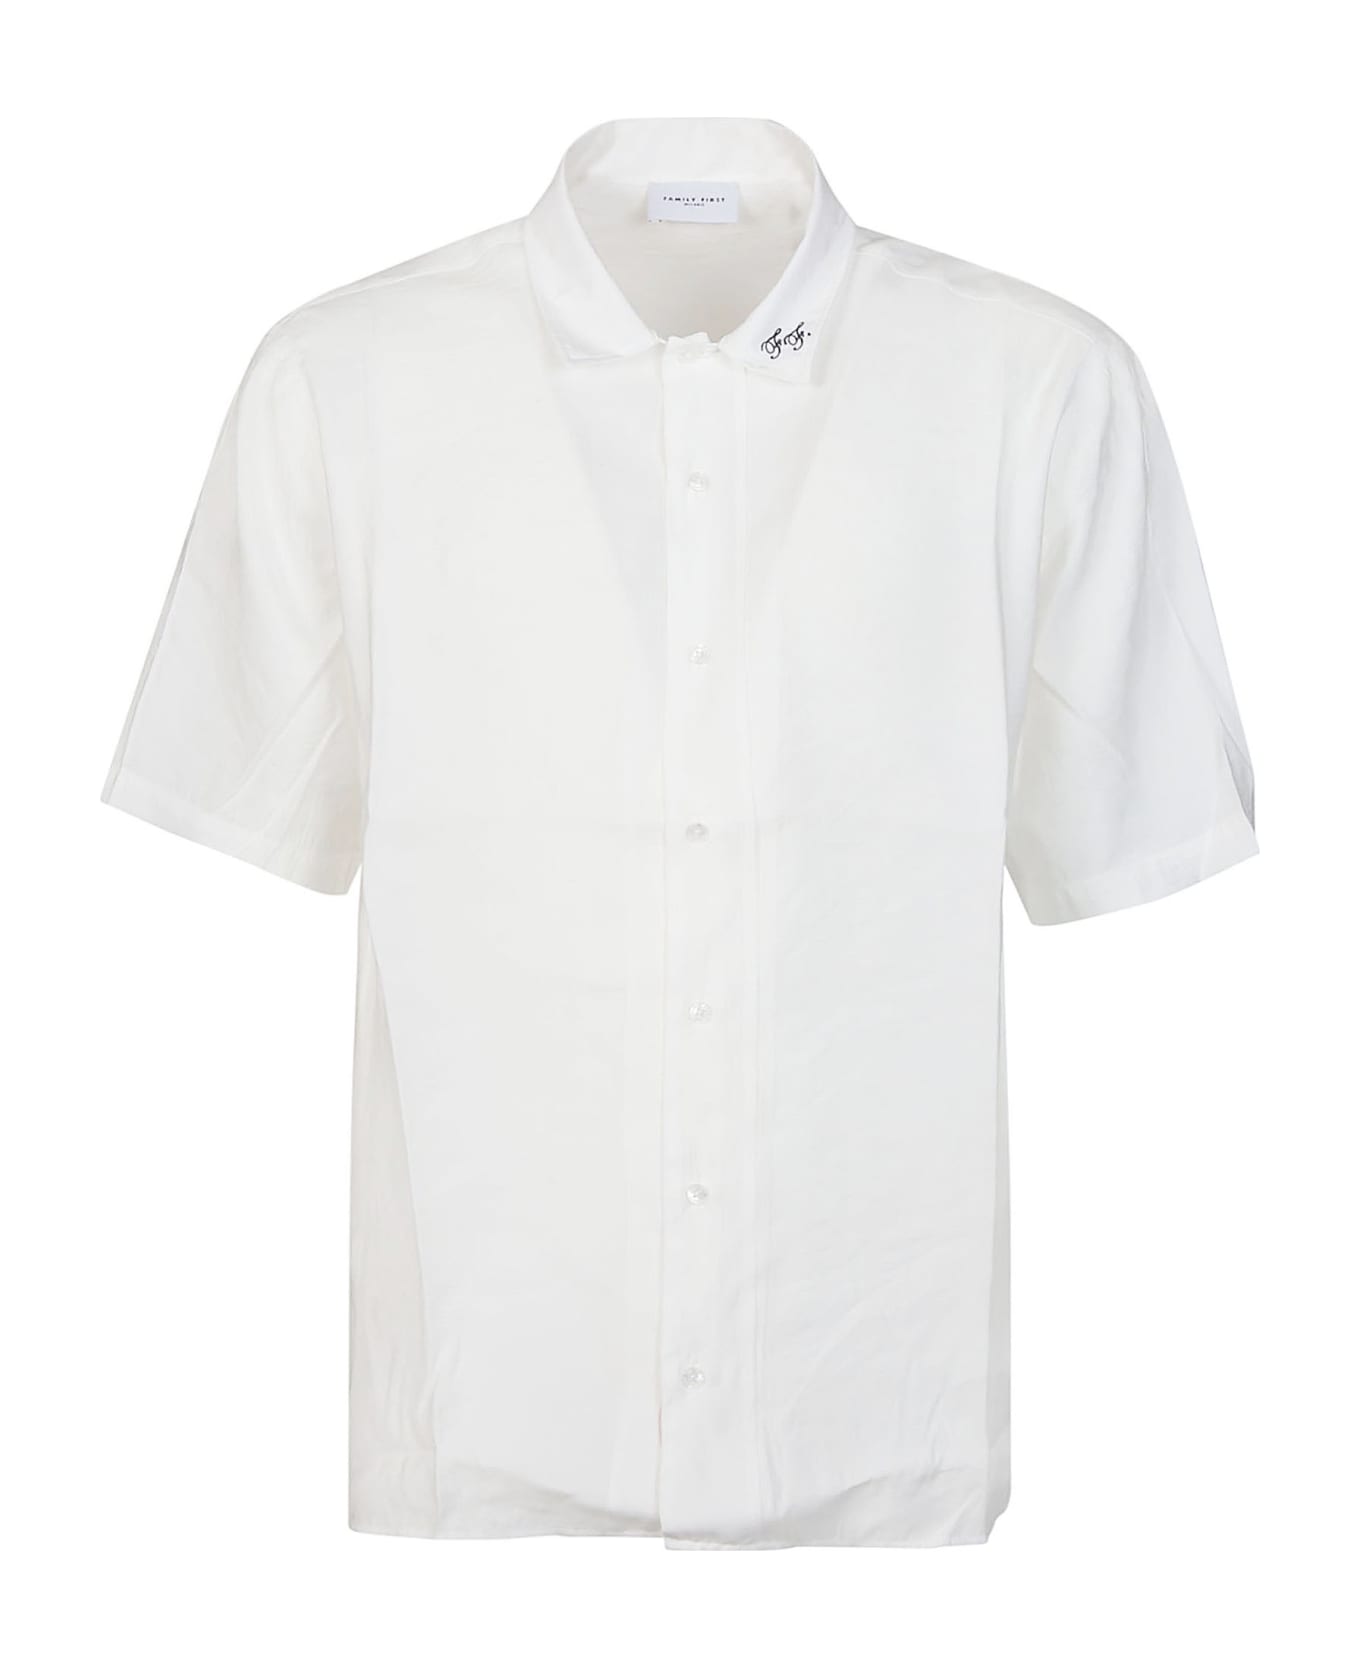 Family First Milano Short Sleeve Cupro Shirt - WHITE